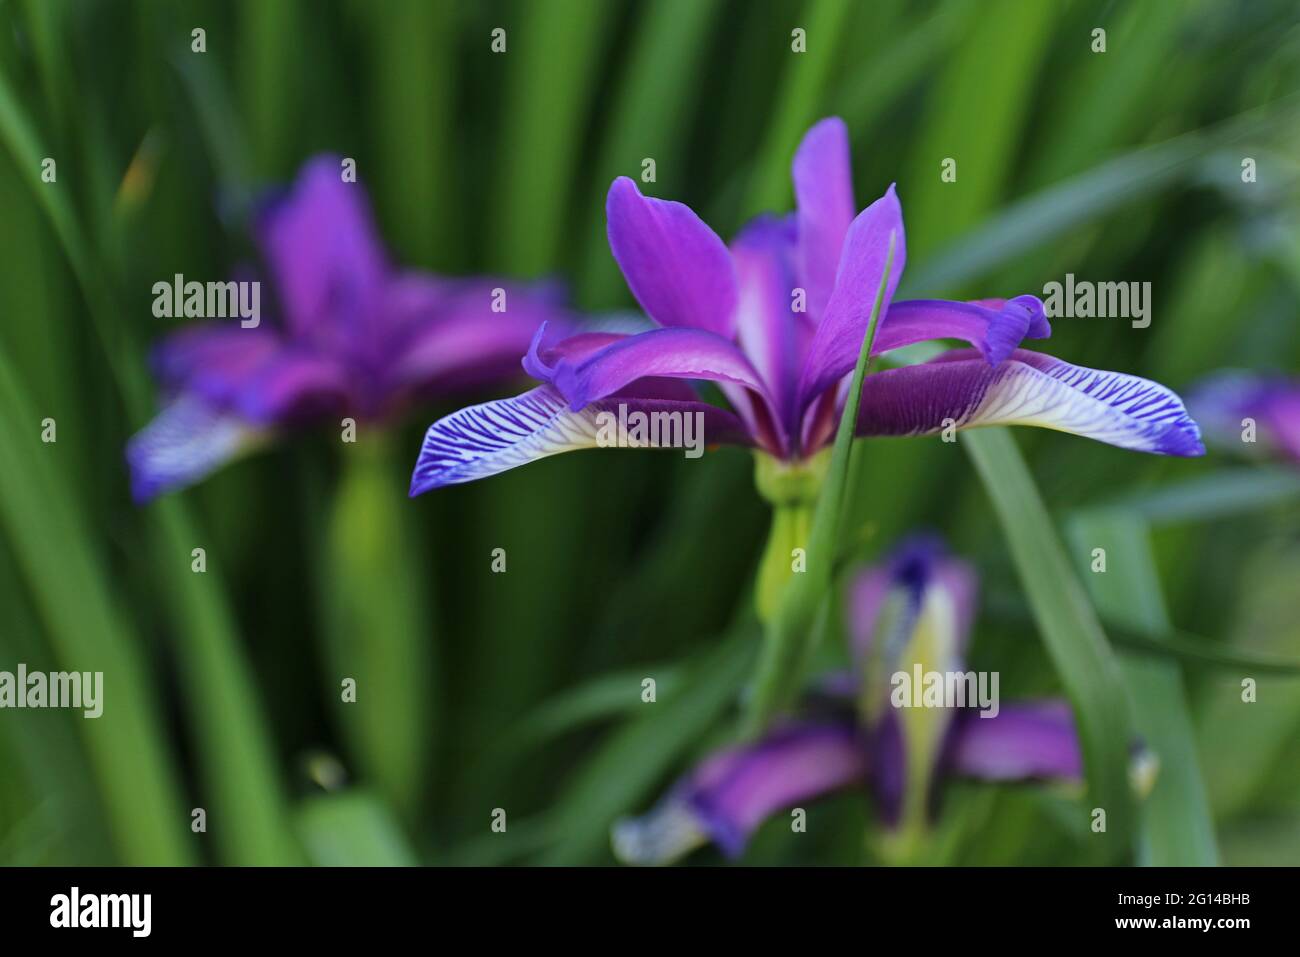 Iris graminea on blurred background.  Blue and violet flowers, almost hidden by narrow, grassy leaves, and a plum scented fragrance. It is cultivated Stock Photo